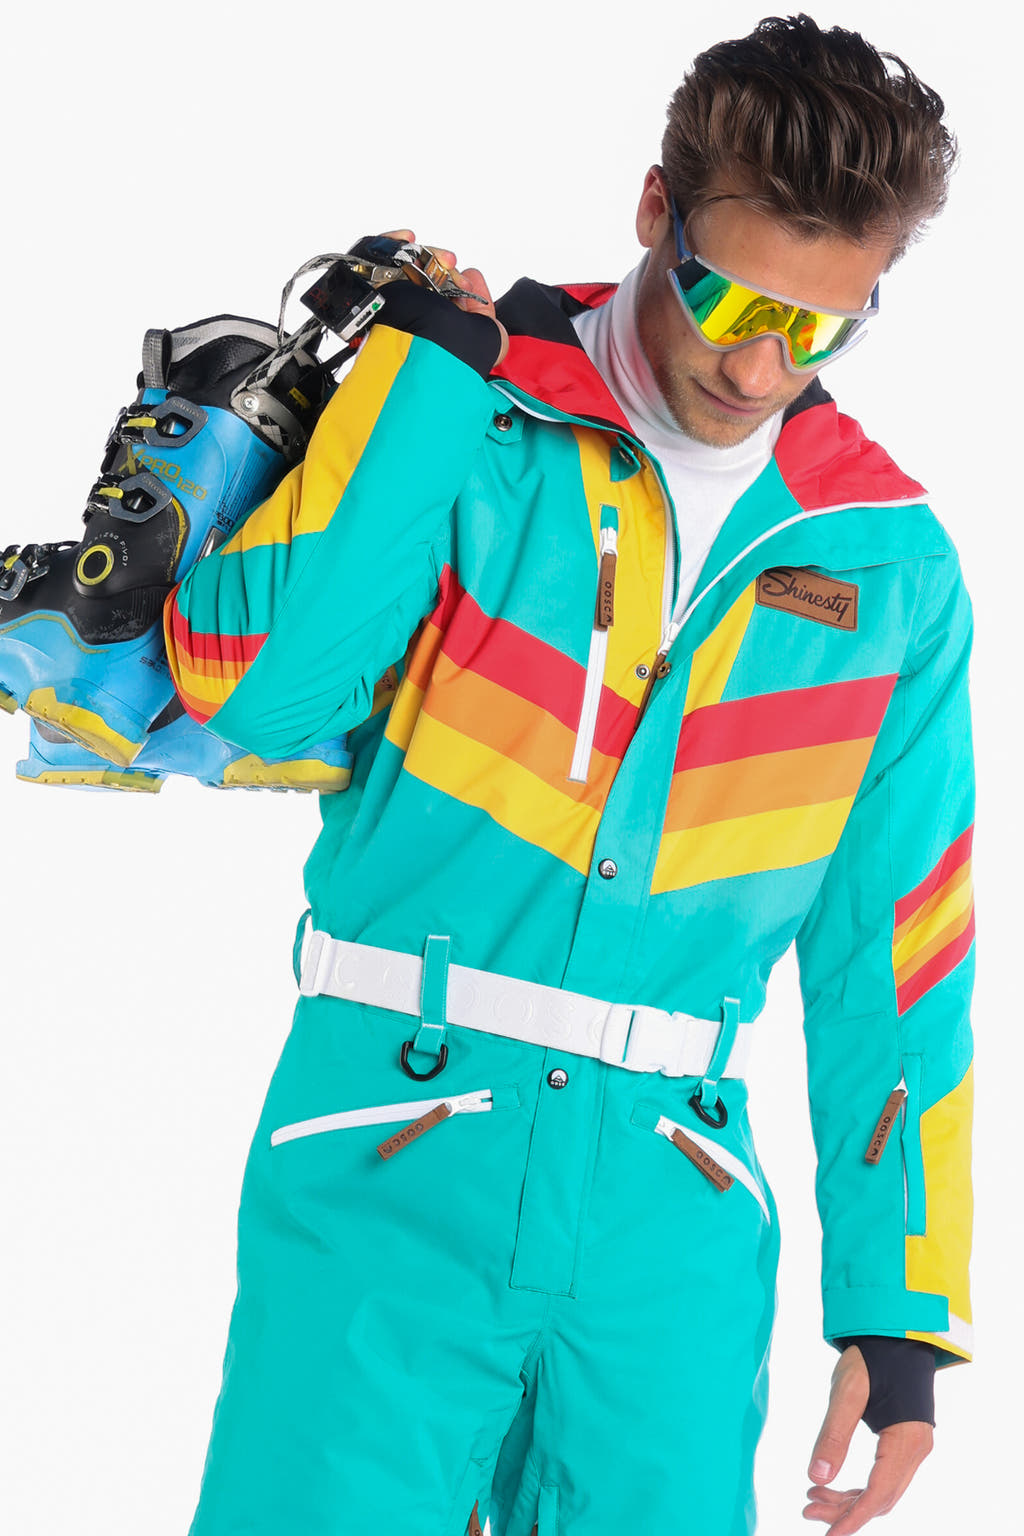 The Side Country Sender | Men's Turquoise Striped Retro Ski Suit